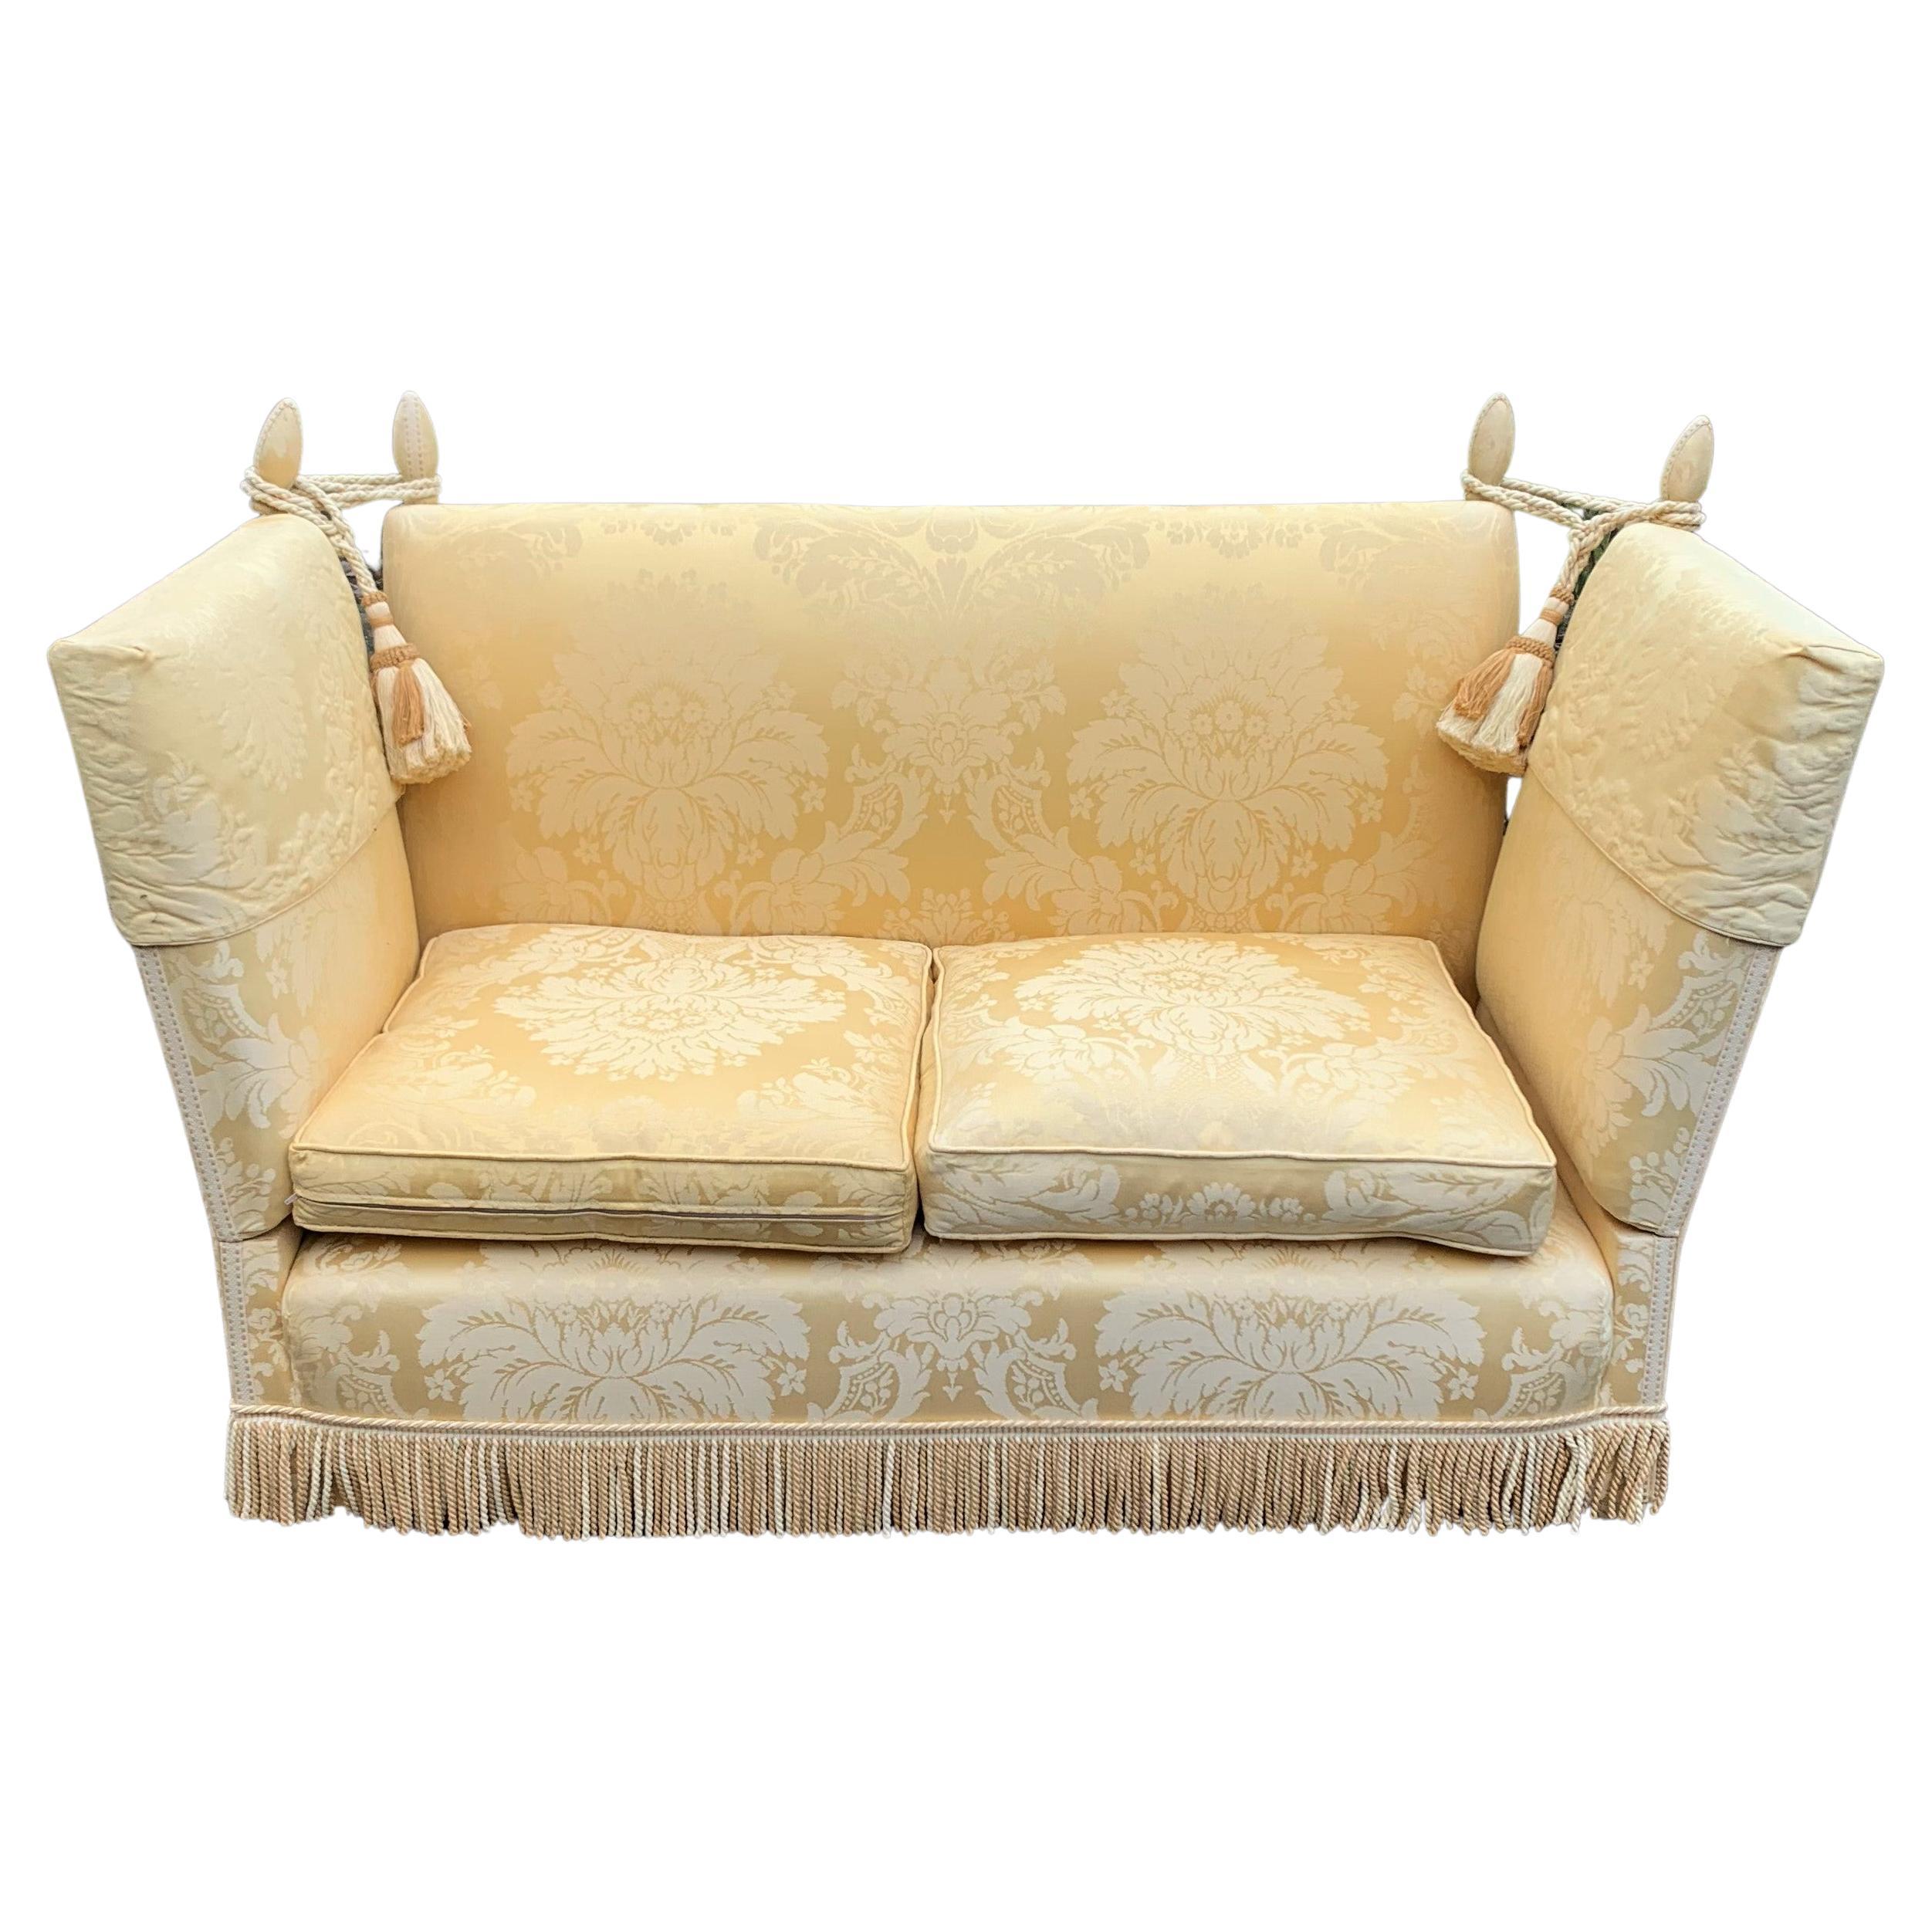 What is the purpose of a Knole sofa?